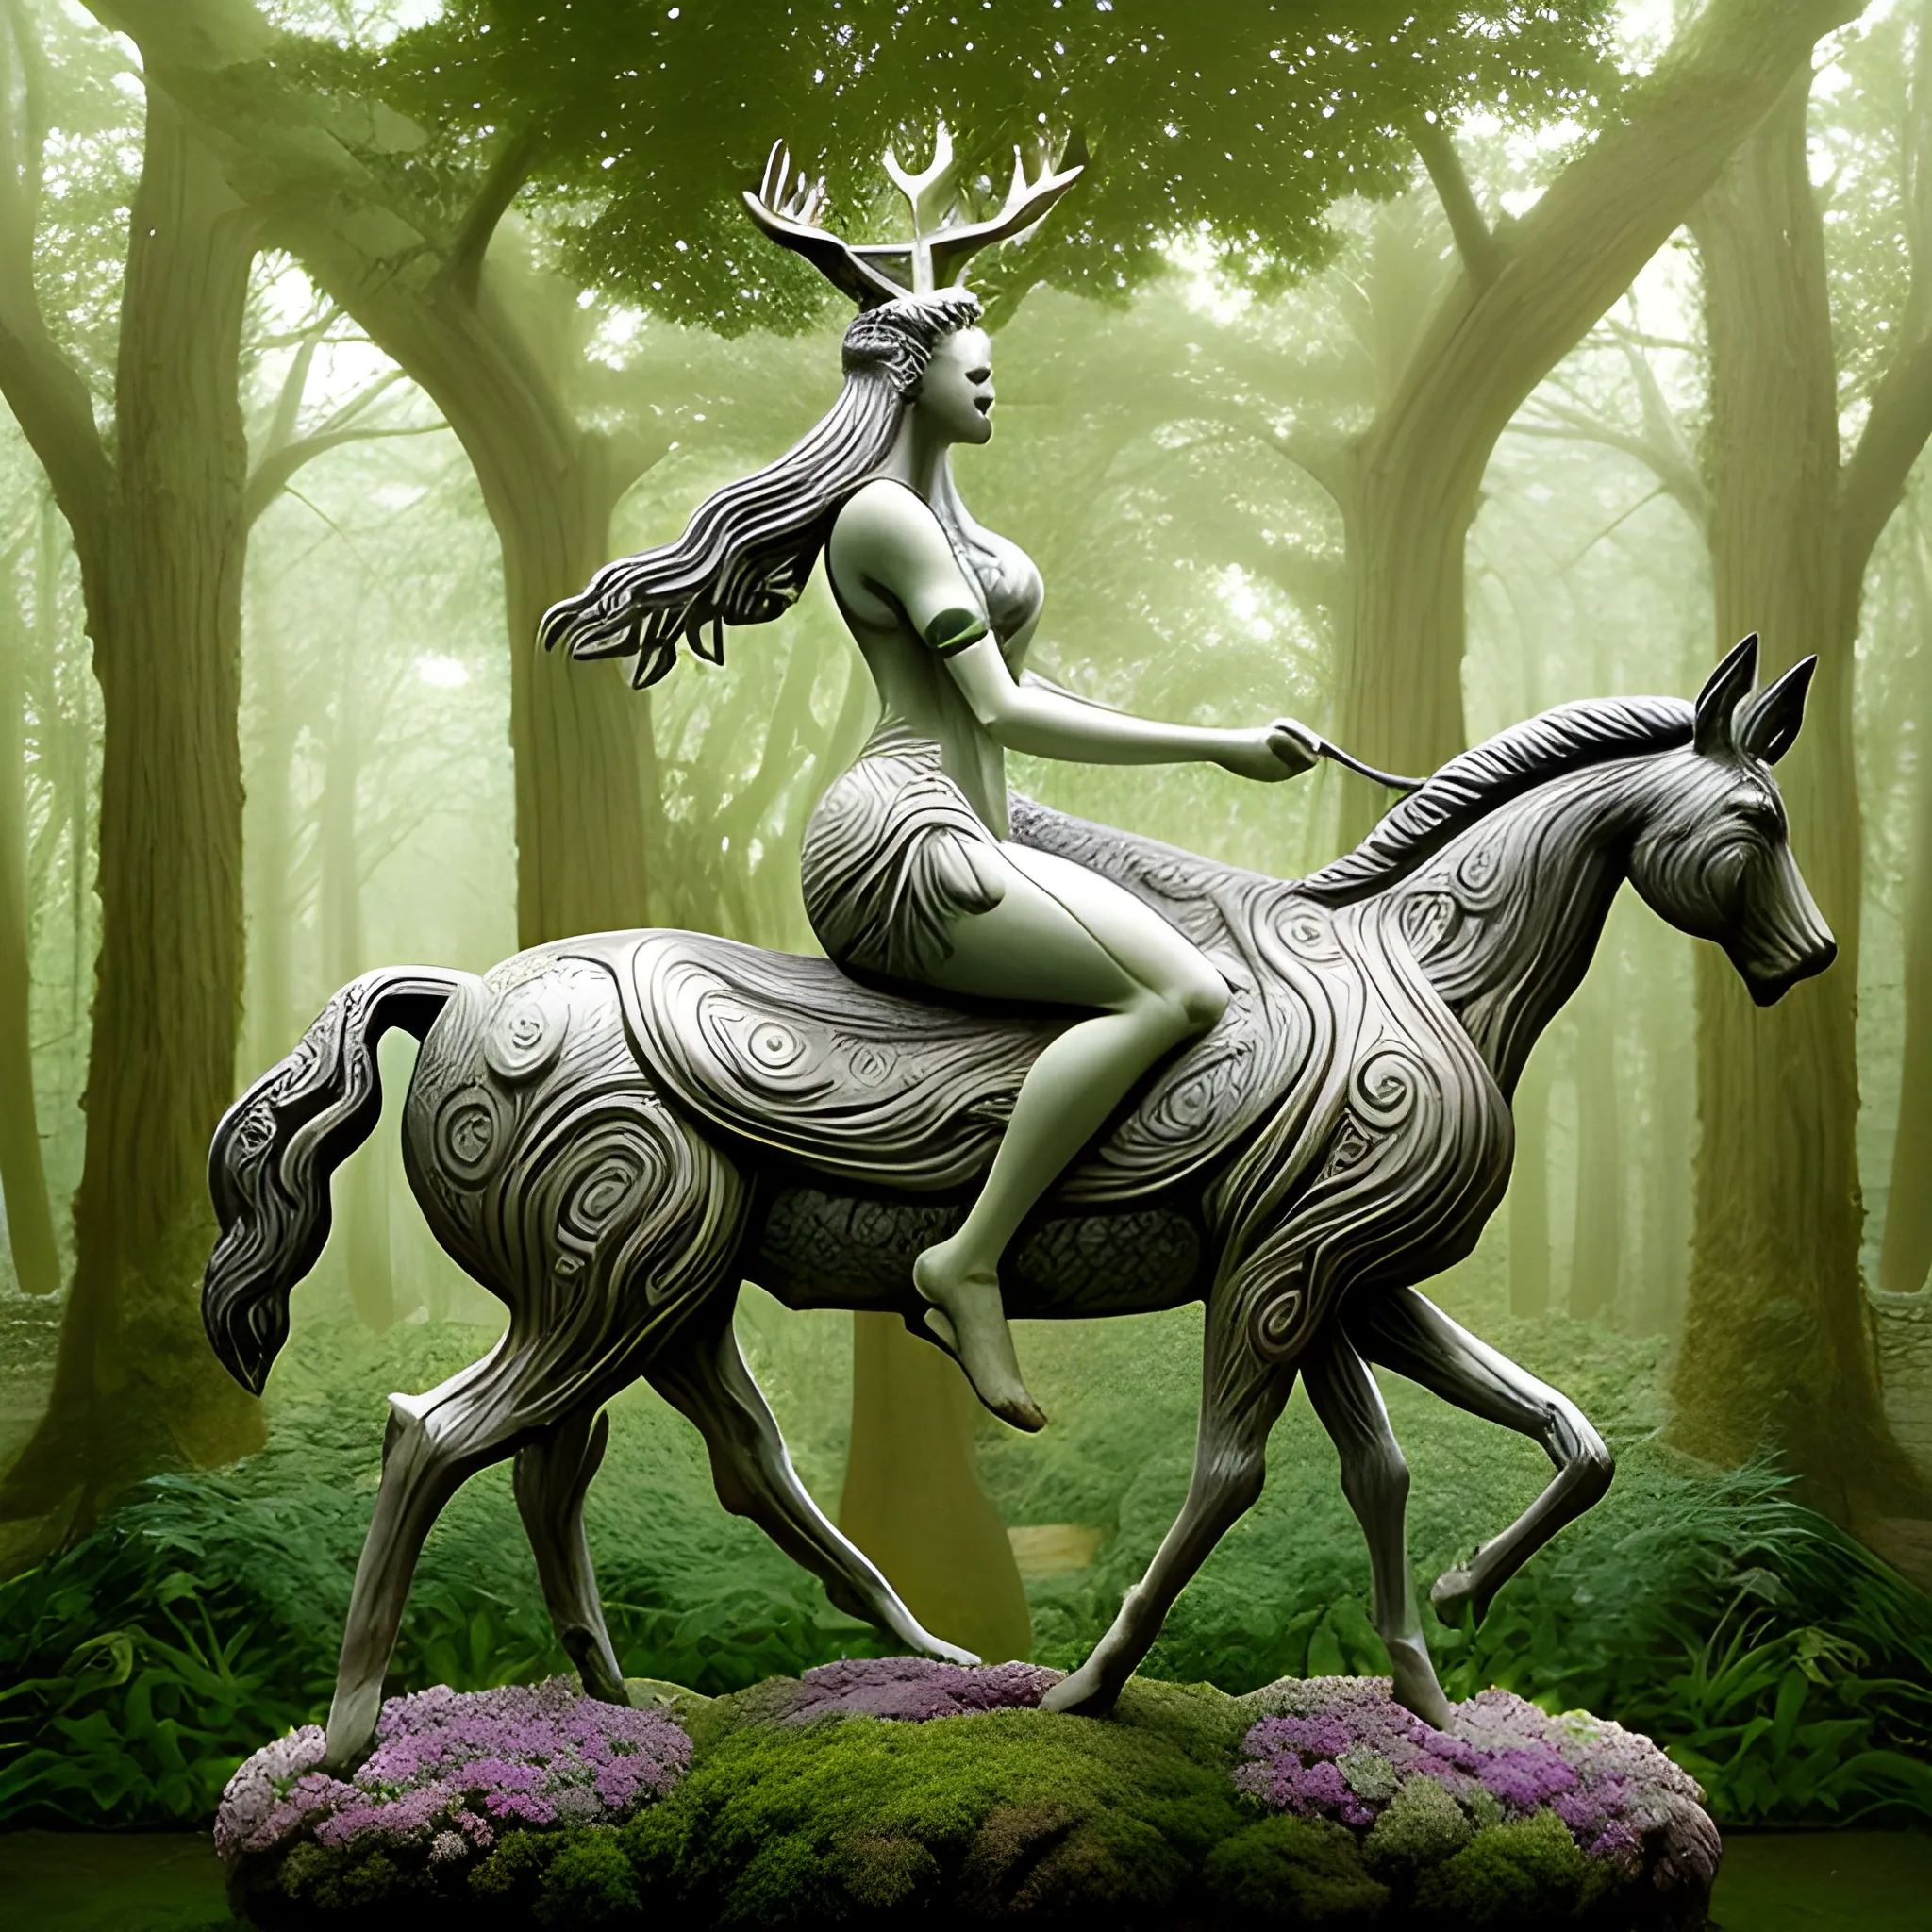 , Trippy A hyperrealistic representation of a female goddess of deer and plants, riding a creature that fuses a cat with a horse, created by a prodigious sculptor from the future